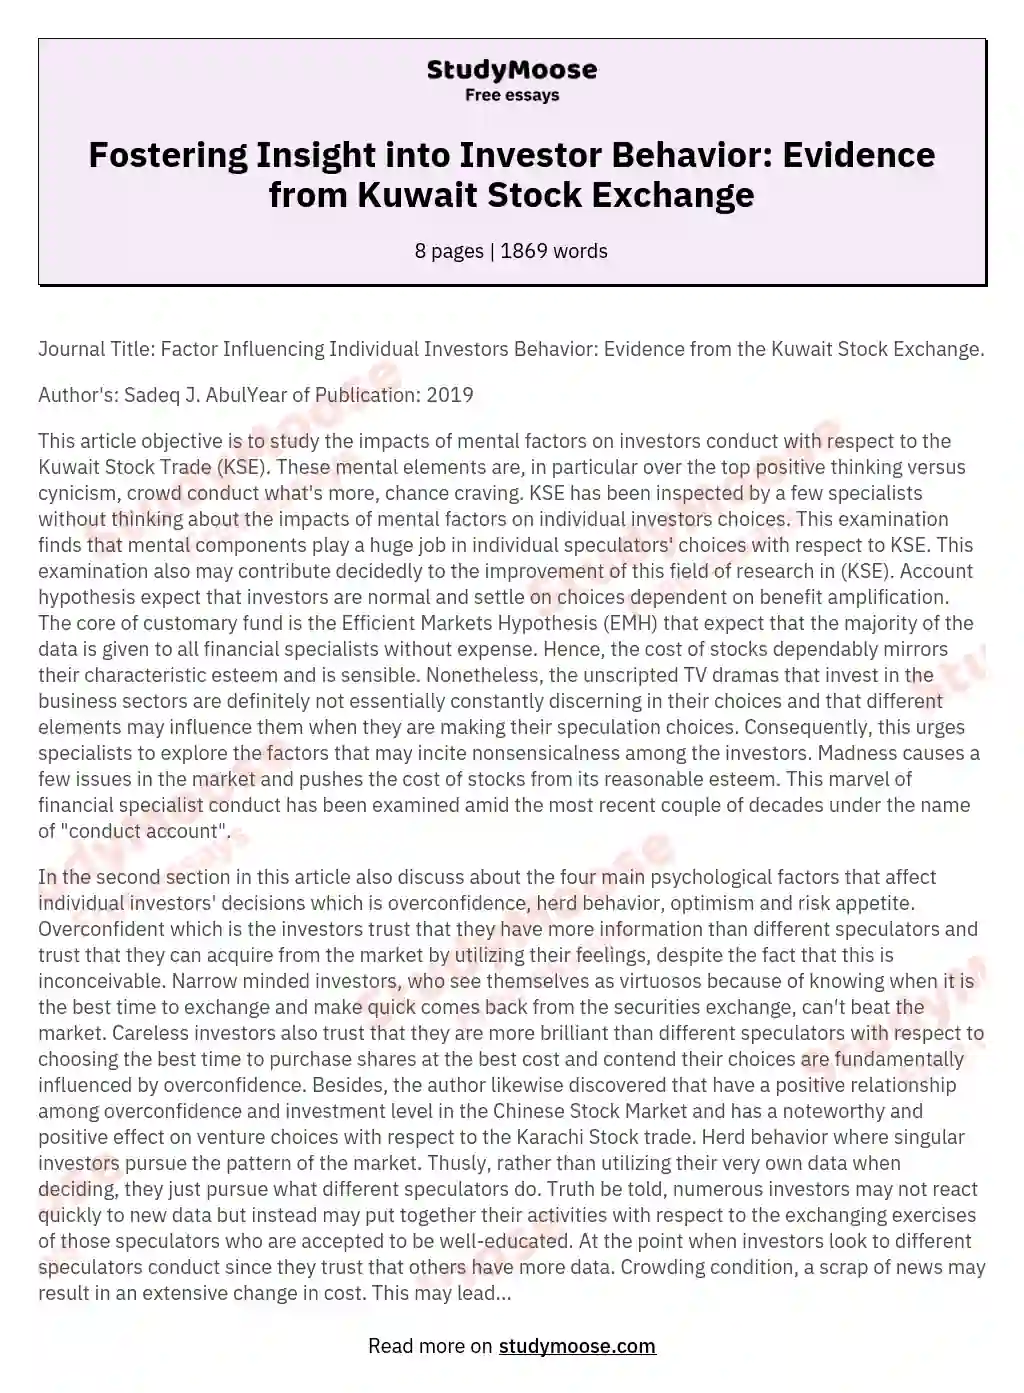 Fostering Insight into Investor Behavior: Evidence from Kuwait Stock Exchange essay